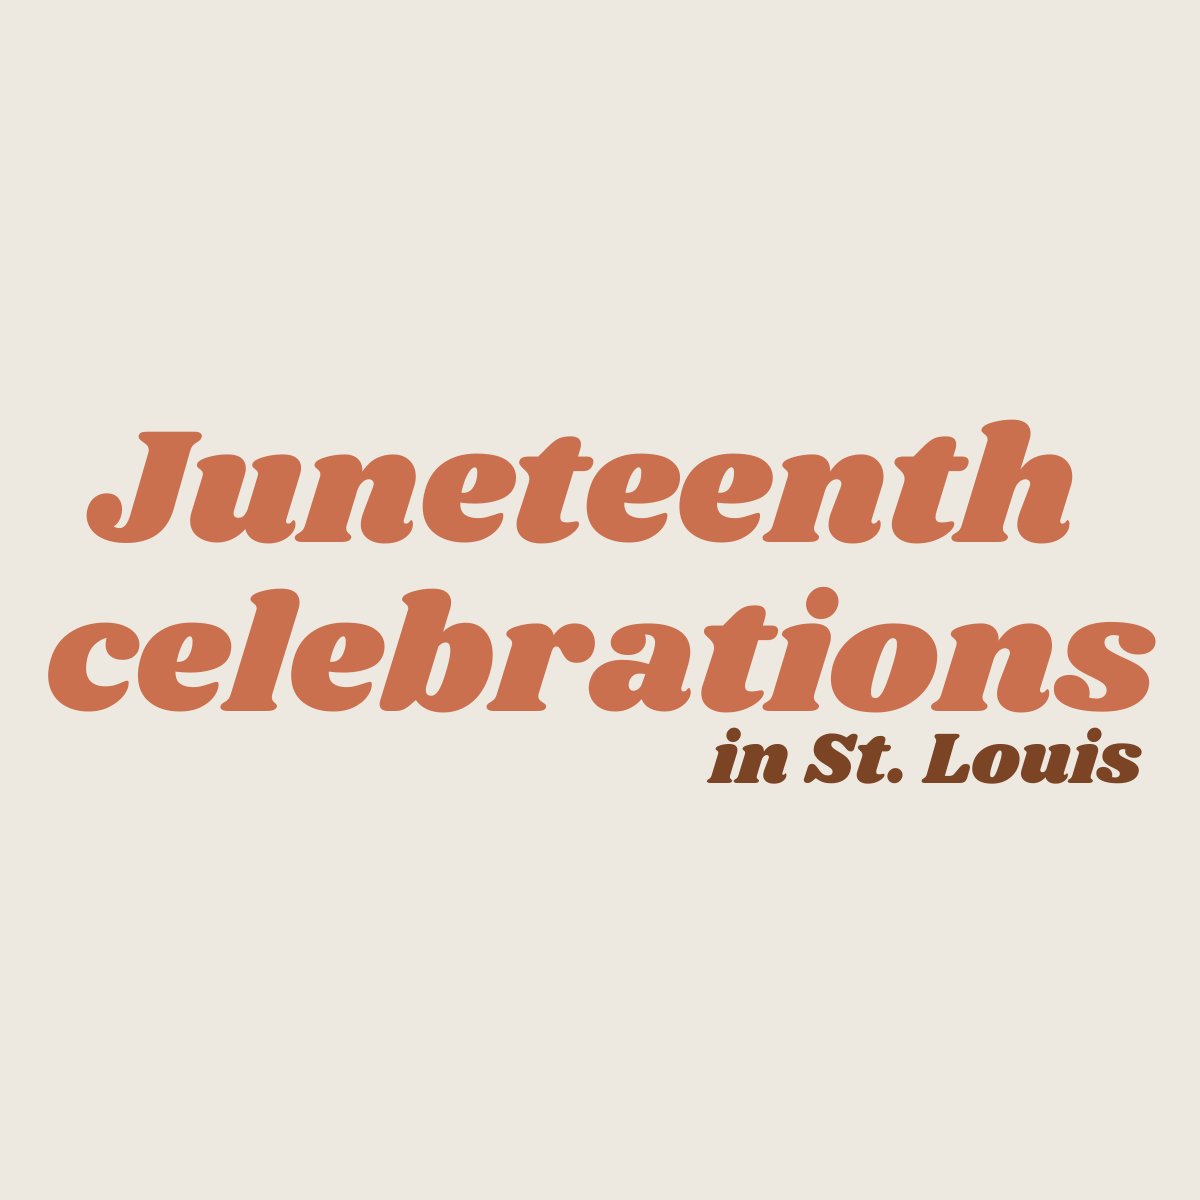 Graphic that reads, "Juneteenth celebrations in St. Louis."